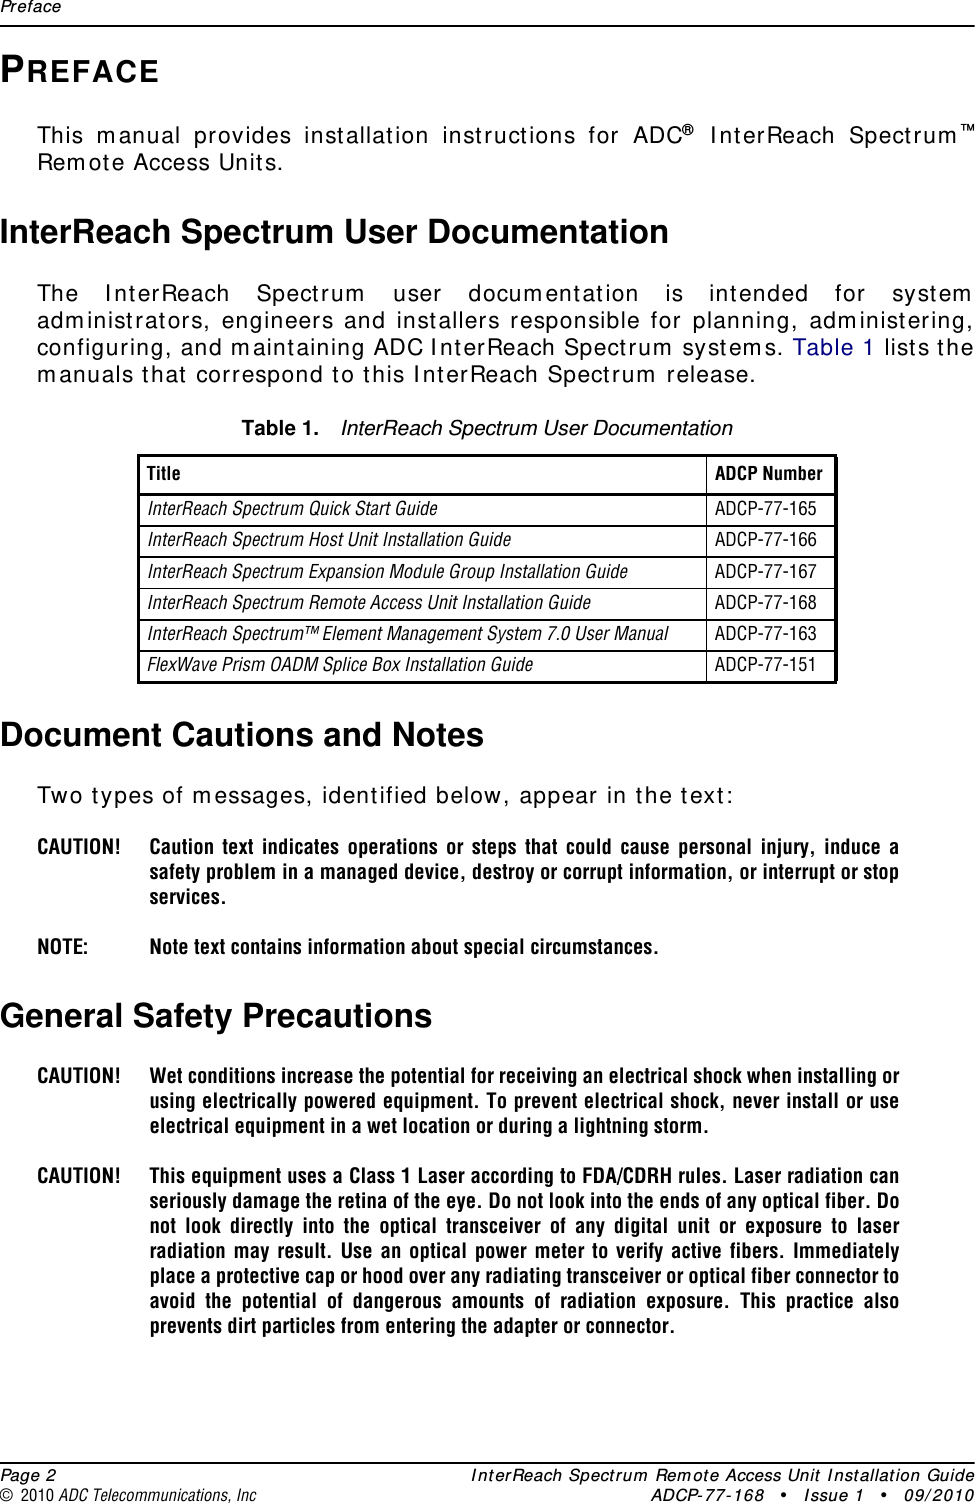 Preface  Page 2 InterReach Spectrum Remote Access Unit Installation Guide© 2010 ADC Telecommunications, Inc ADCP-77-168 • Issue 1 • 09/2010PREFACEThis manual provides installation instructions for ADC® InterReach Spectrum™Remote Access Units. InterReach Spectrum User DocumentationThe InterReach Spectrum user documentation is intended for system administrators, engineers and installers responsible for planning, administering, configuring, and maintaining ADC InterReach Spectrum systems. Table 1 lists the manuals that correspond to this InterReach Spectrum release.Document Cautions and NotesTwo types of messages, identified below, appear in the text:CAUTION! Caution text indicates operations or steps that could cause personal injury, induce a safety problem in a managed device, destroy or corrupt information, or interrupt or stop services.NOTE: Note text contains information about special circumstances.General Safety PrecautionsCAUTION! Wet conditions increase the potential for receiving an electrical shock when installing or using electrically powered equipment. To prevent electrical shock, never install or use electrical equipment in a wet location or during a lightning storm. CAUTION! This equipment uses a Class 1 Laser according to FDA/CDRH rules. Laser radiation can seriously damage the retina of the eye. Do not look into the ends of any optical fiber. Do not look directly into the optical transceiver of any digital unit or exposure to laser radiation may result. Use an optical power meter to verify active fibers. Immediately place a protective cap or hood over any radiating transceiver or optical fiber connector to avoid the potential of dangerous amounts of radiation exposure. This practice also prevents dirt particles from entering the adapter or connector.Table 1. InterReach Spectrum User DocumentationTitle ADCP Number InterReach Spectrum Quick Start Guide ADCP-77-165InterReach Spectrum Host Unit Installation Guide ADCP-77-166InterReach Spectrum Expansion Module Group Installation Guide ADCP-77-167InterReach Spectrum Remote Access Unit Installation Guide ADCP-77-168InterReach Spectrum™ Element Management System 7.0 User Manual ADCP-77-163FlexWave Prism OADM Splice Box Installation Guide ADCP-77-151